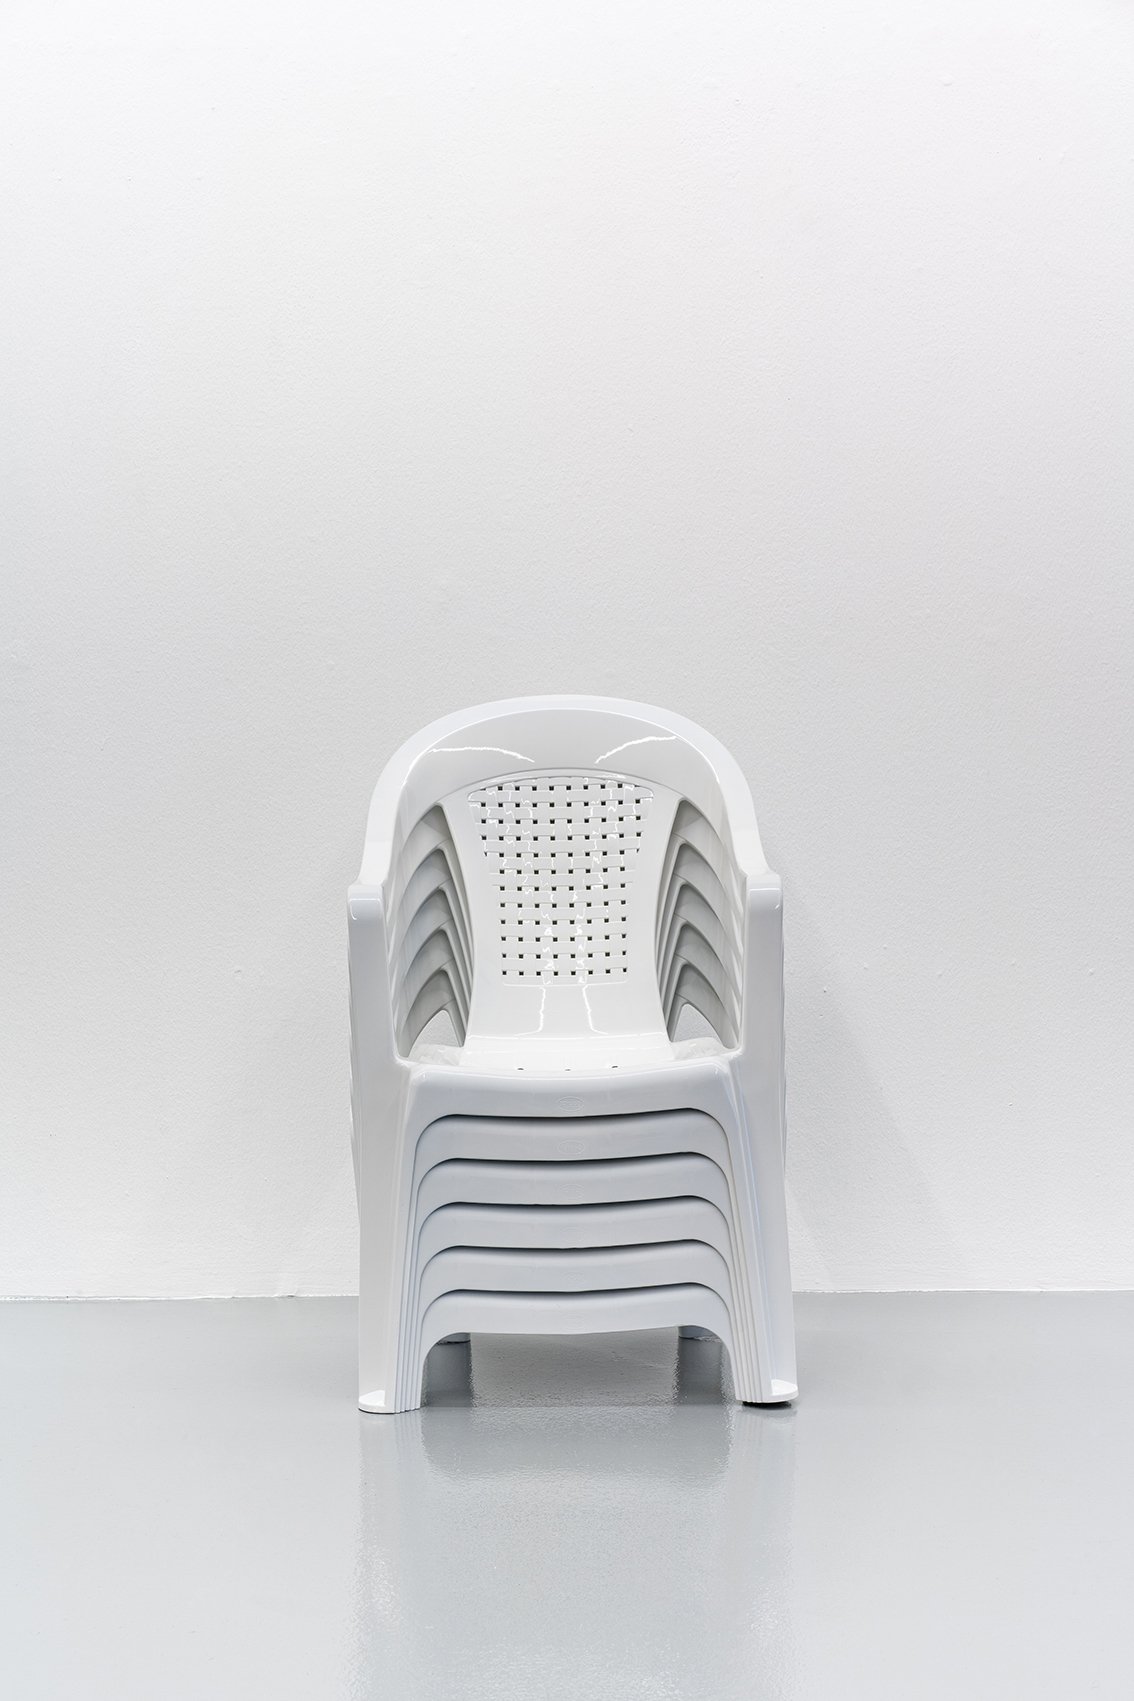  Kray CHEN  Between the Chair and the Butt #2 (Stack of 6 in Pearl White)  2020 Plastic chairs, automotive paint H86 x W53.5 x D59 cm (stacked) 